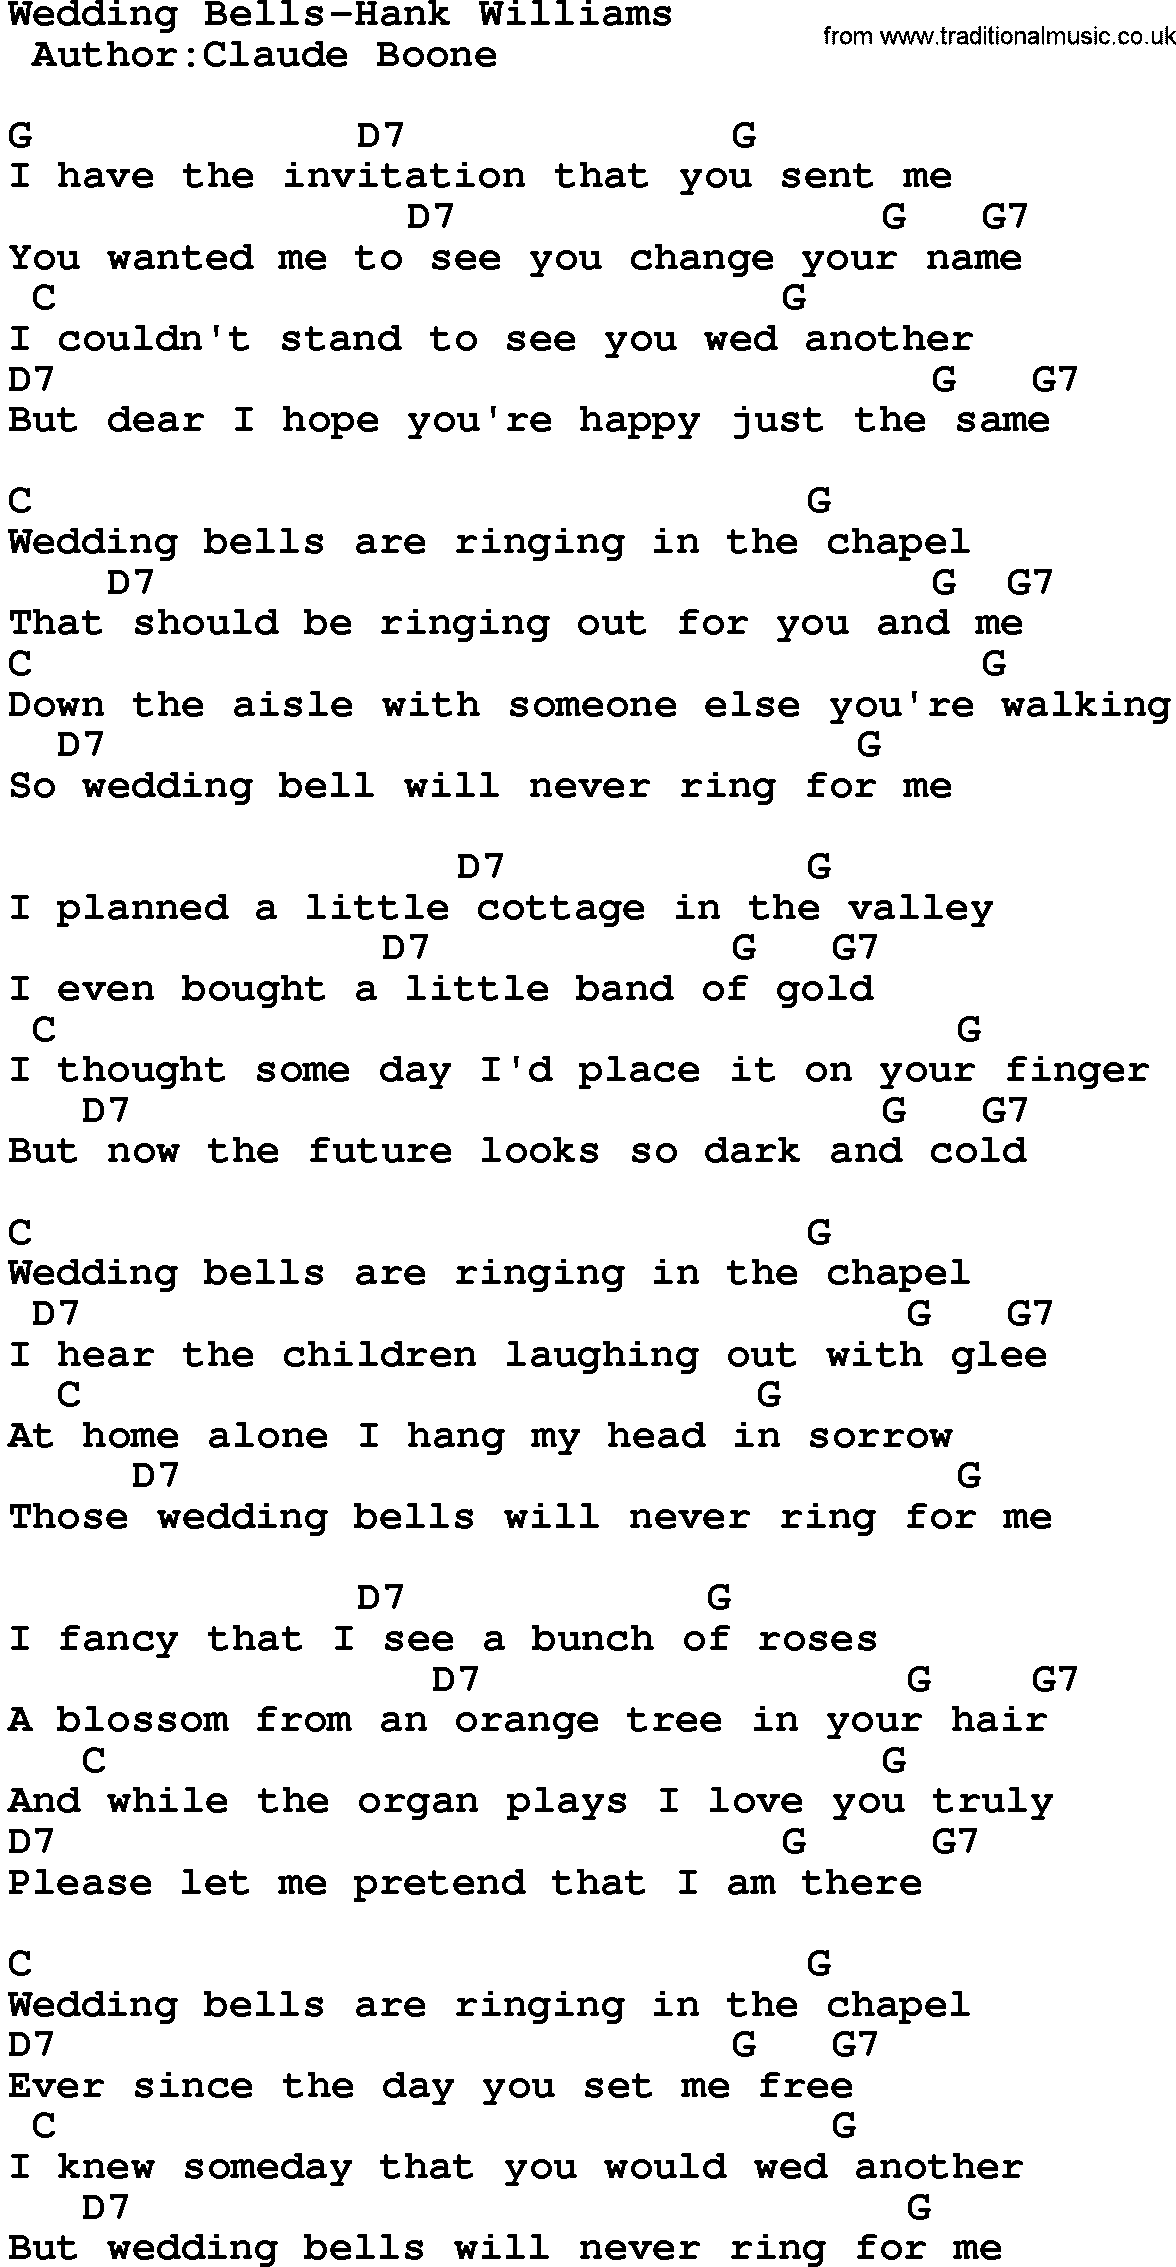 Country music song: Wedding Bells-Hank Williams lyrics and chords